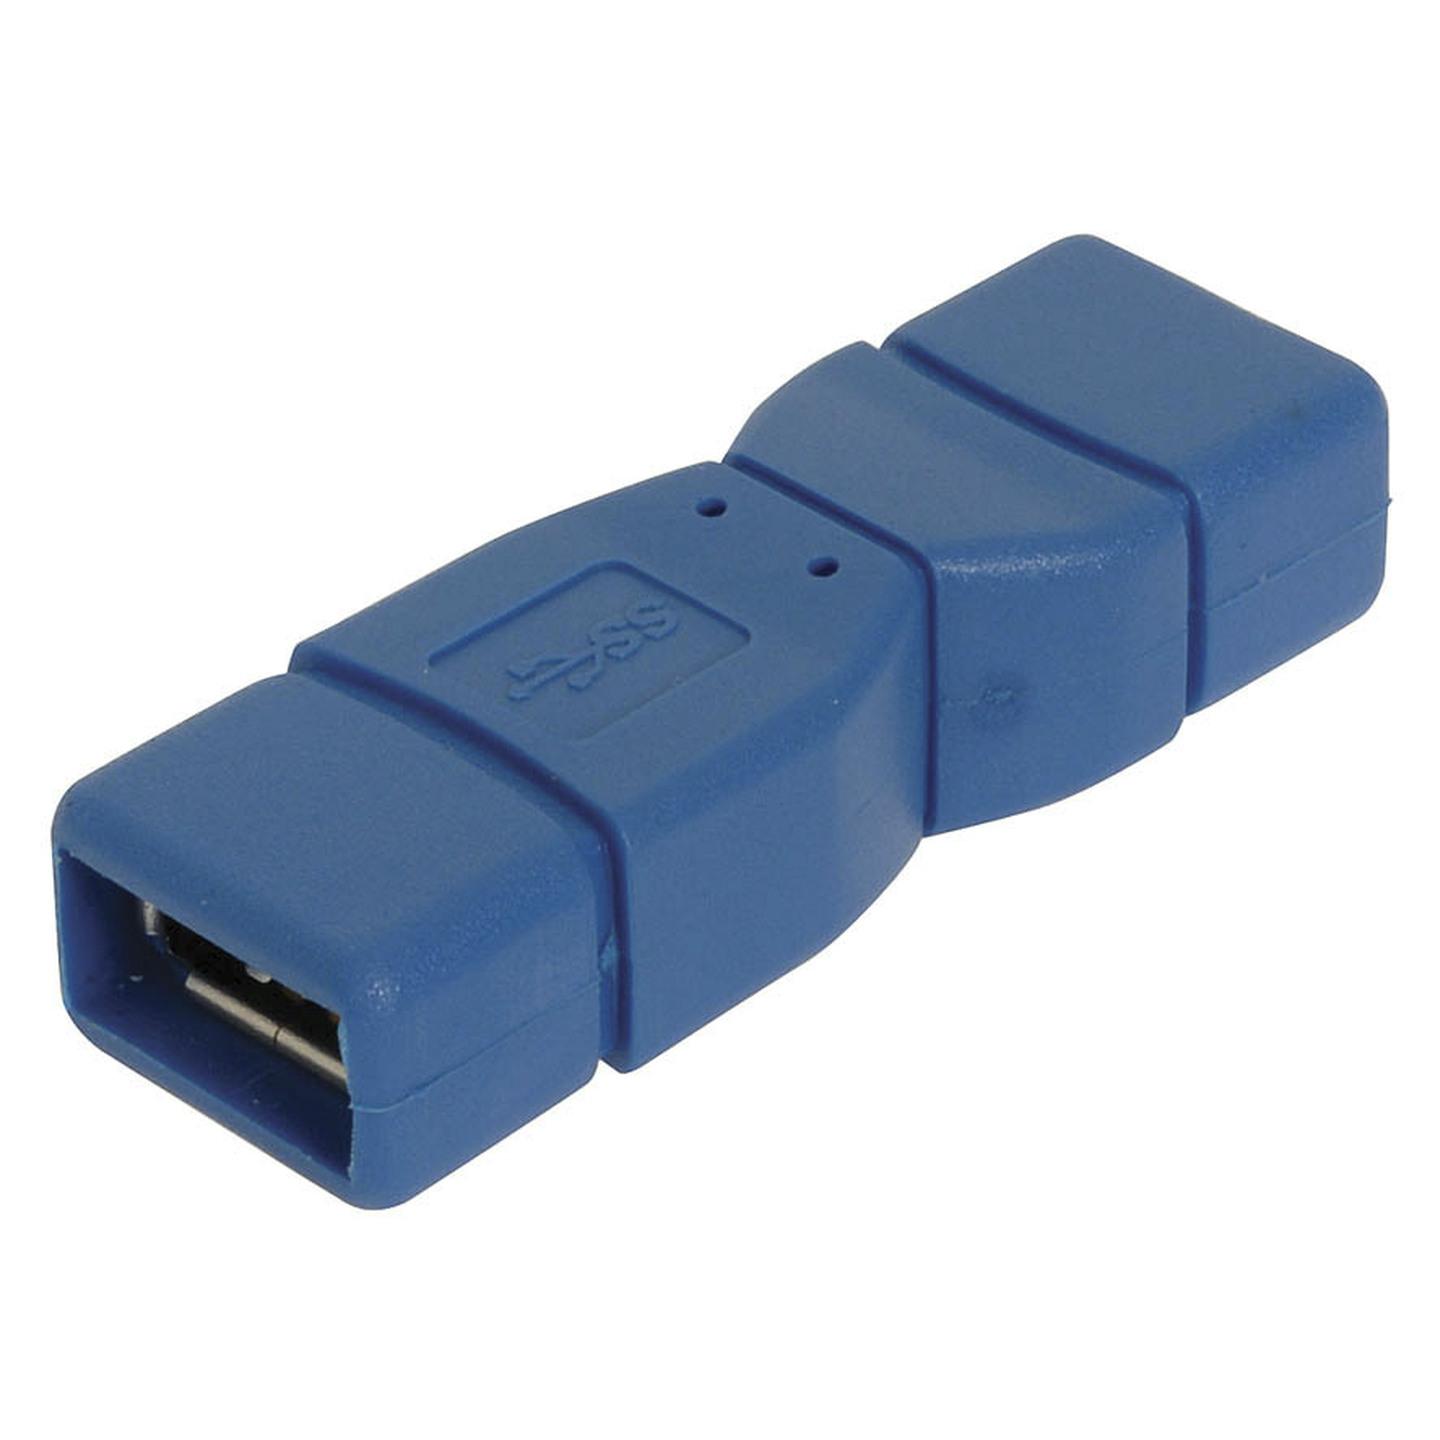 USB 3.0 A to A Adaptor